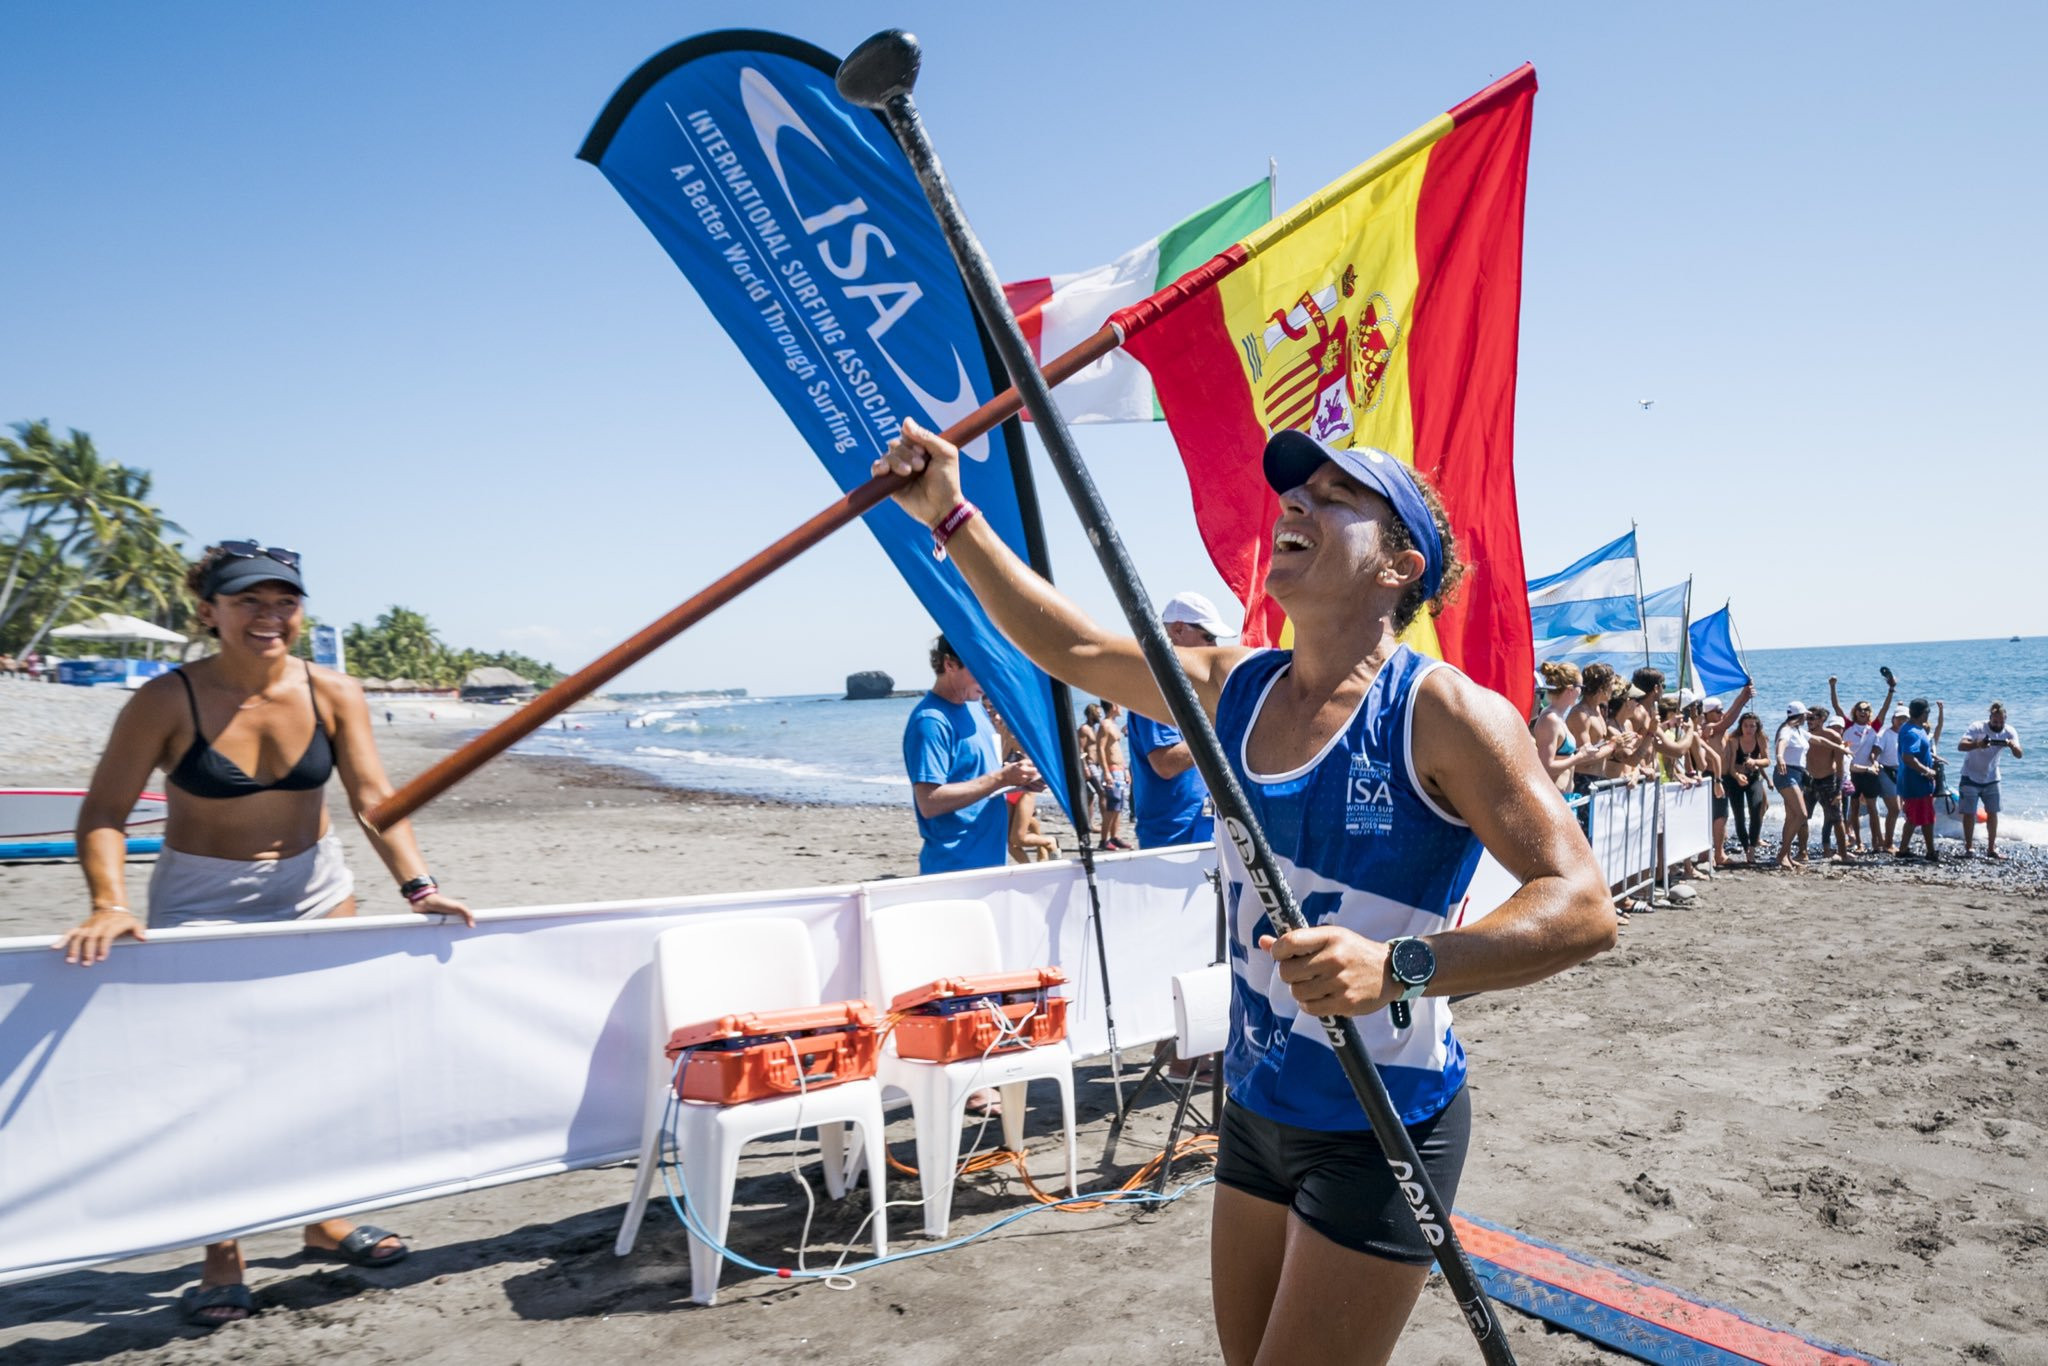 Barreras clinches second gold as Spain dominate day four in El Sunzal